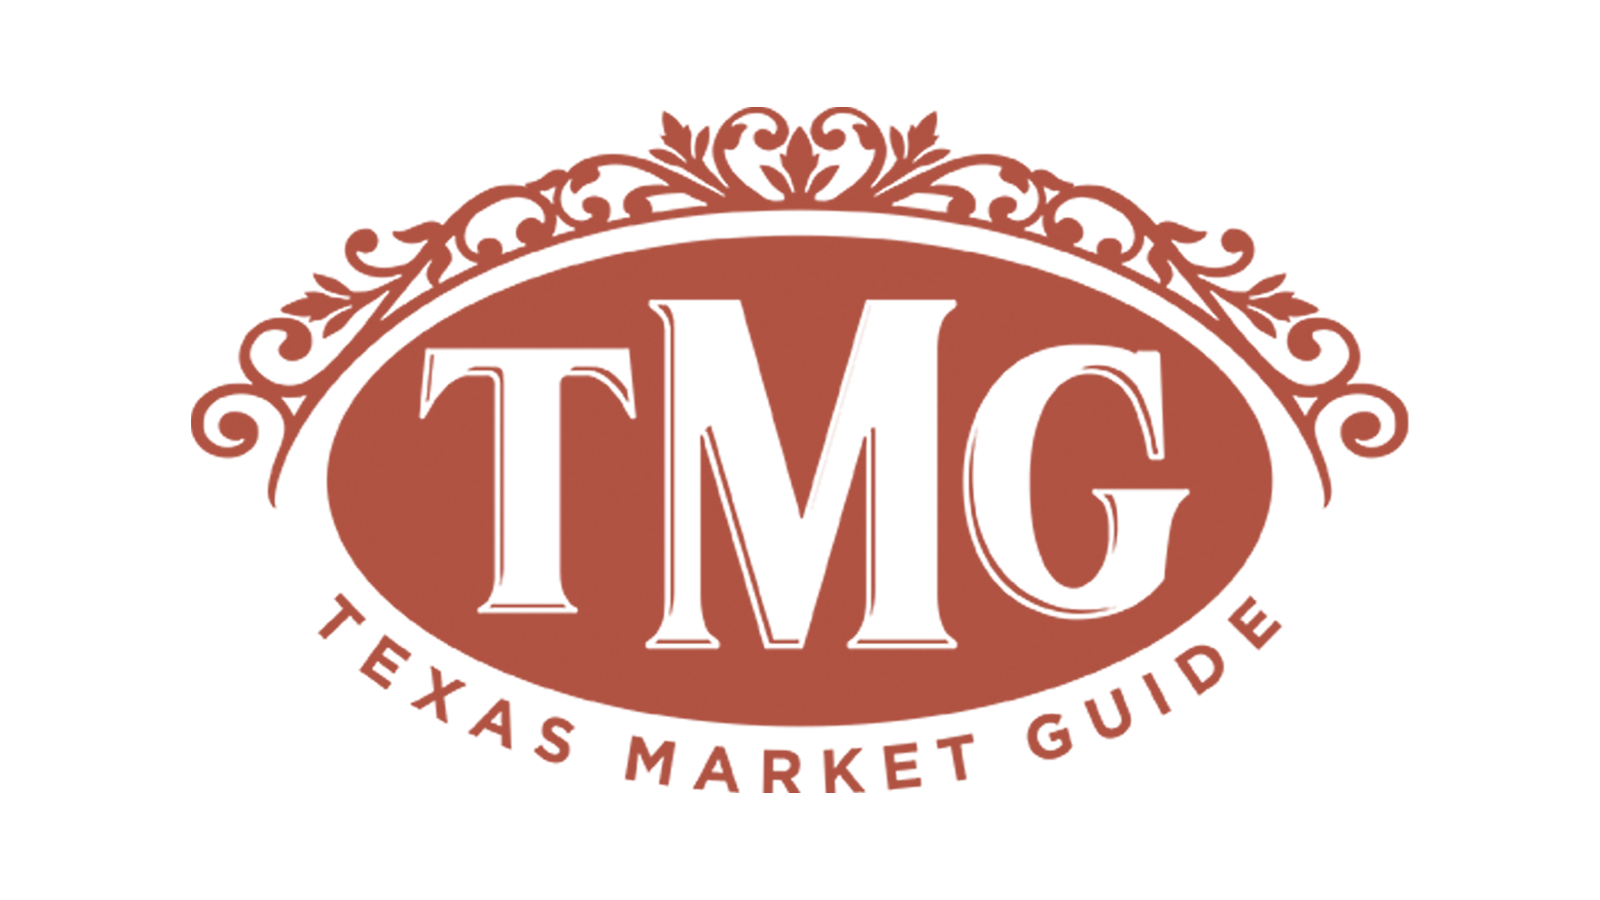 Gifts Archives - Texas Market Guide